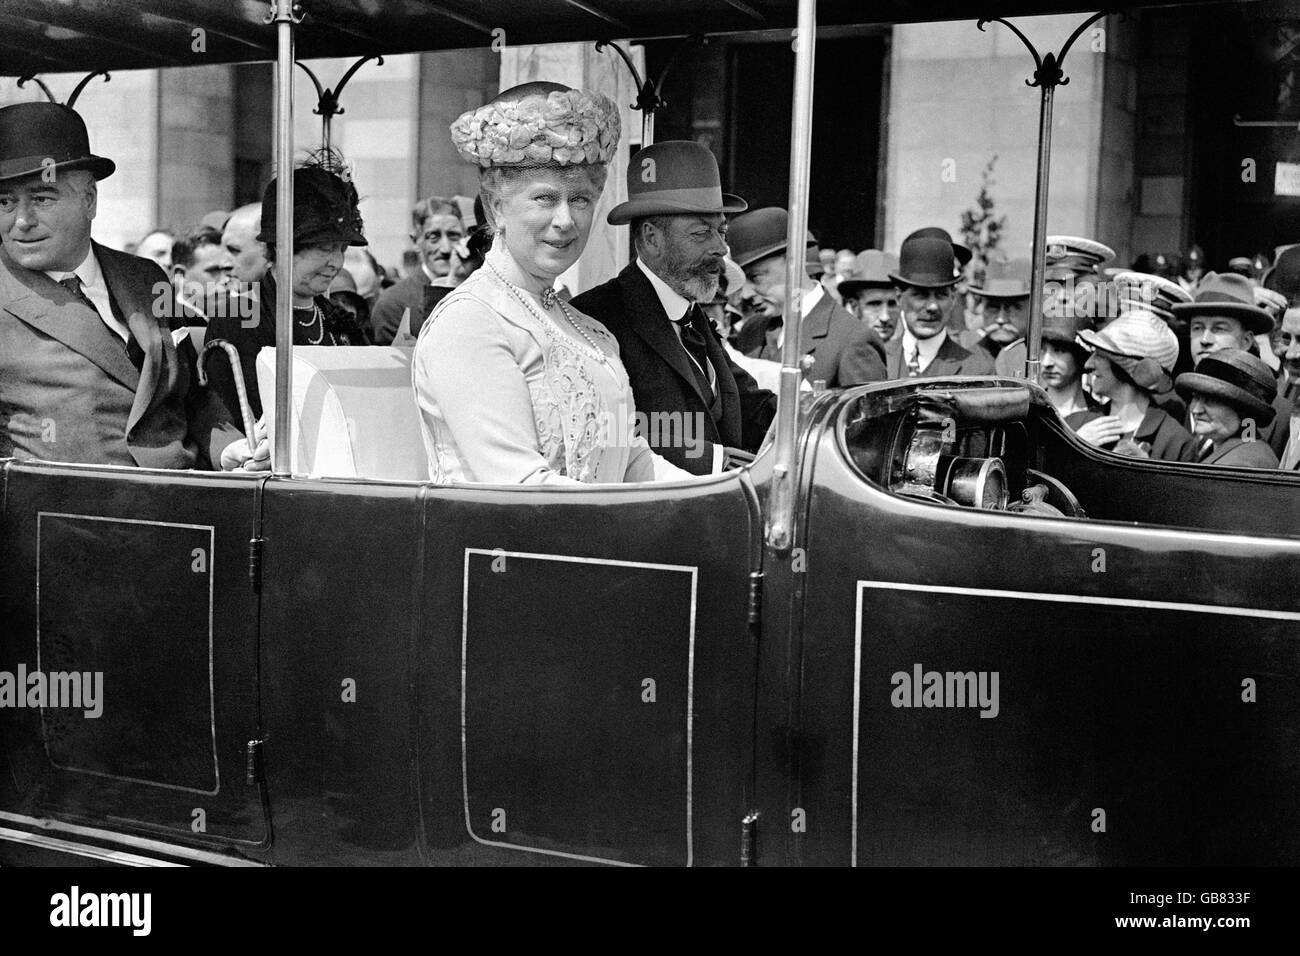 British Royalty - King George V and Queen Mary - London - 1925. King George V and Queen Mary travelling in the Railodok car at the British Empire Exhibition, Wembley. Stock Photo